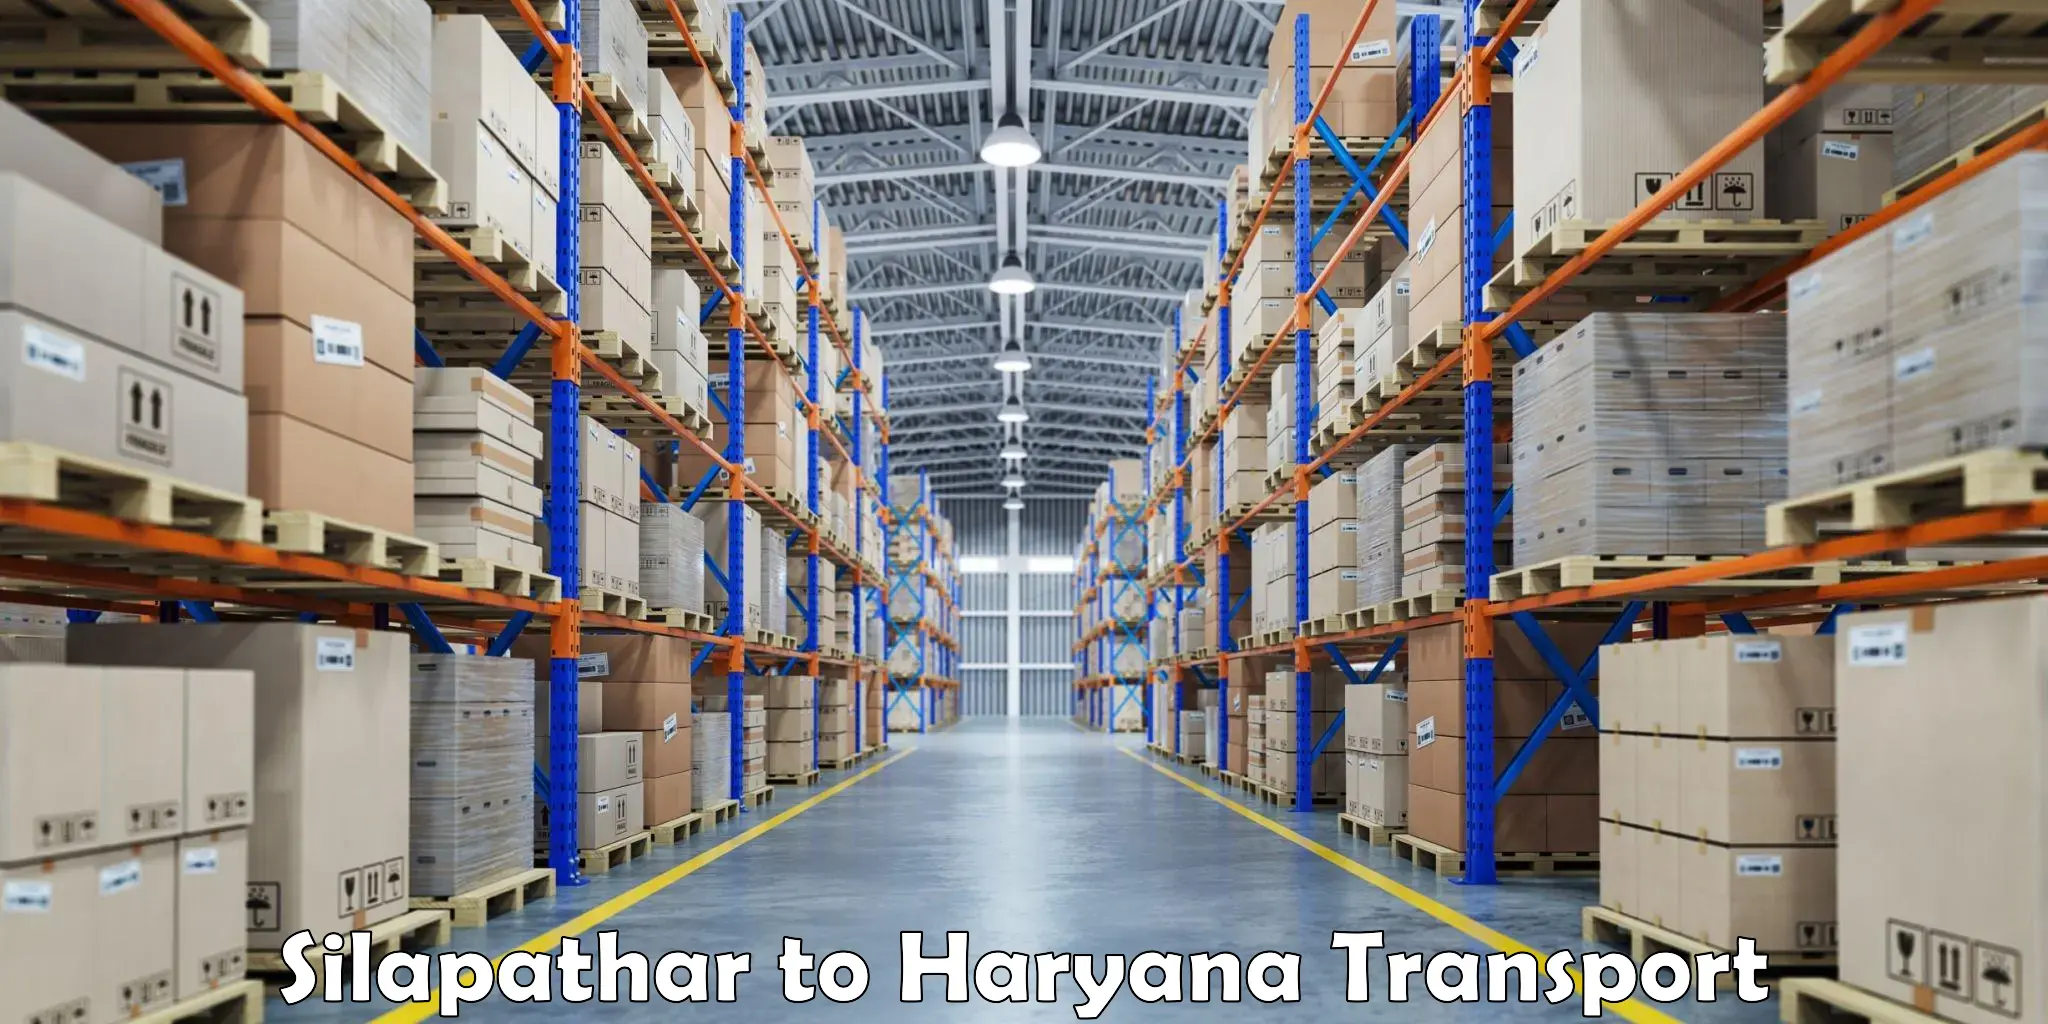 Cargo train transport services Silapathar to Karnal